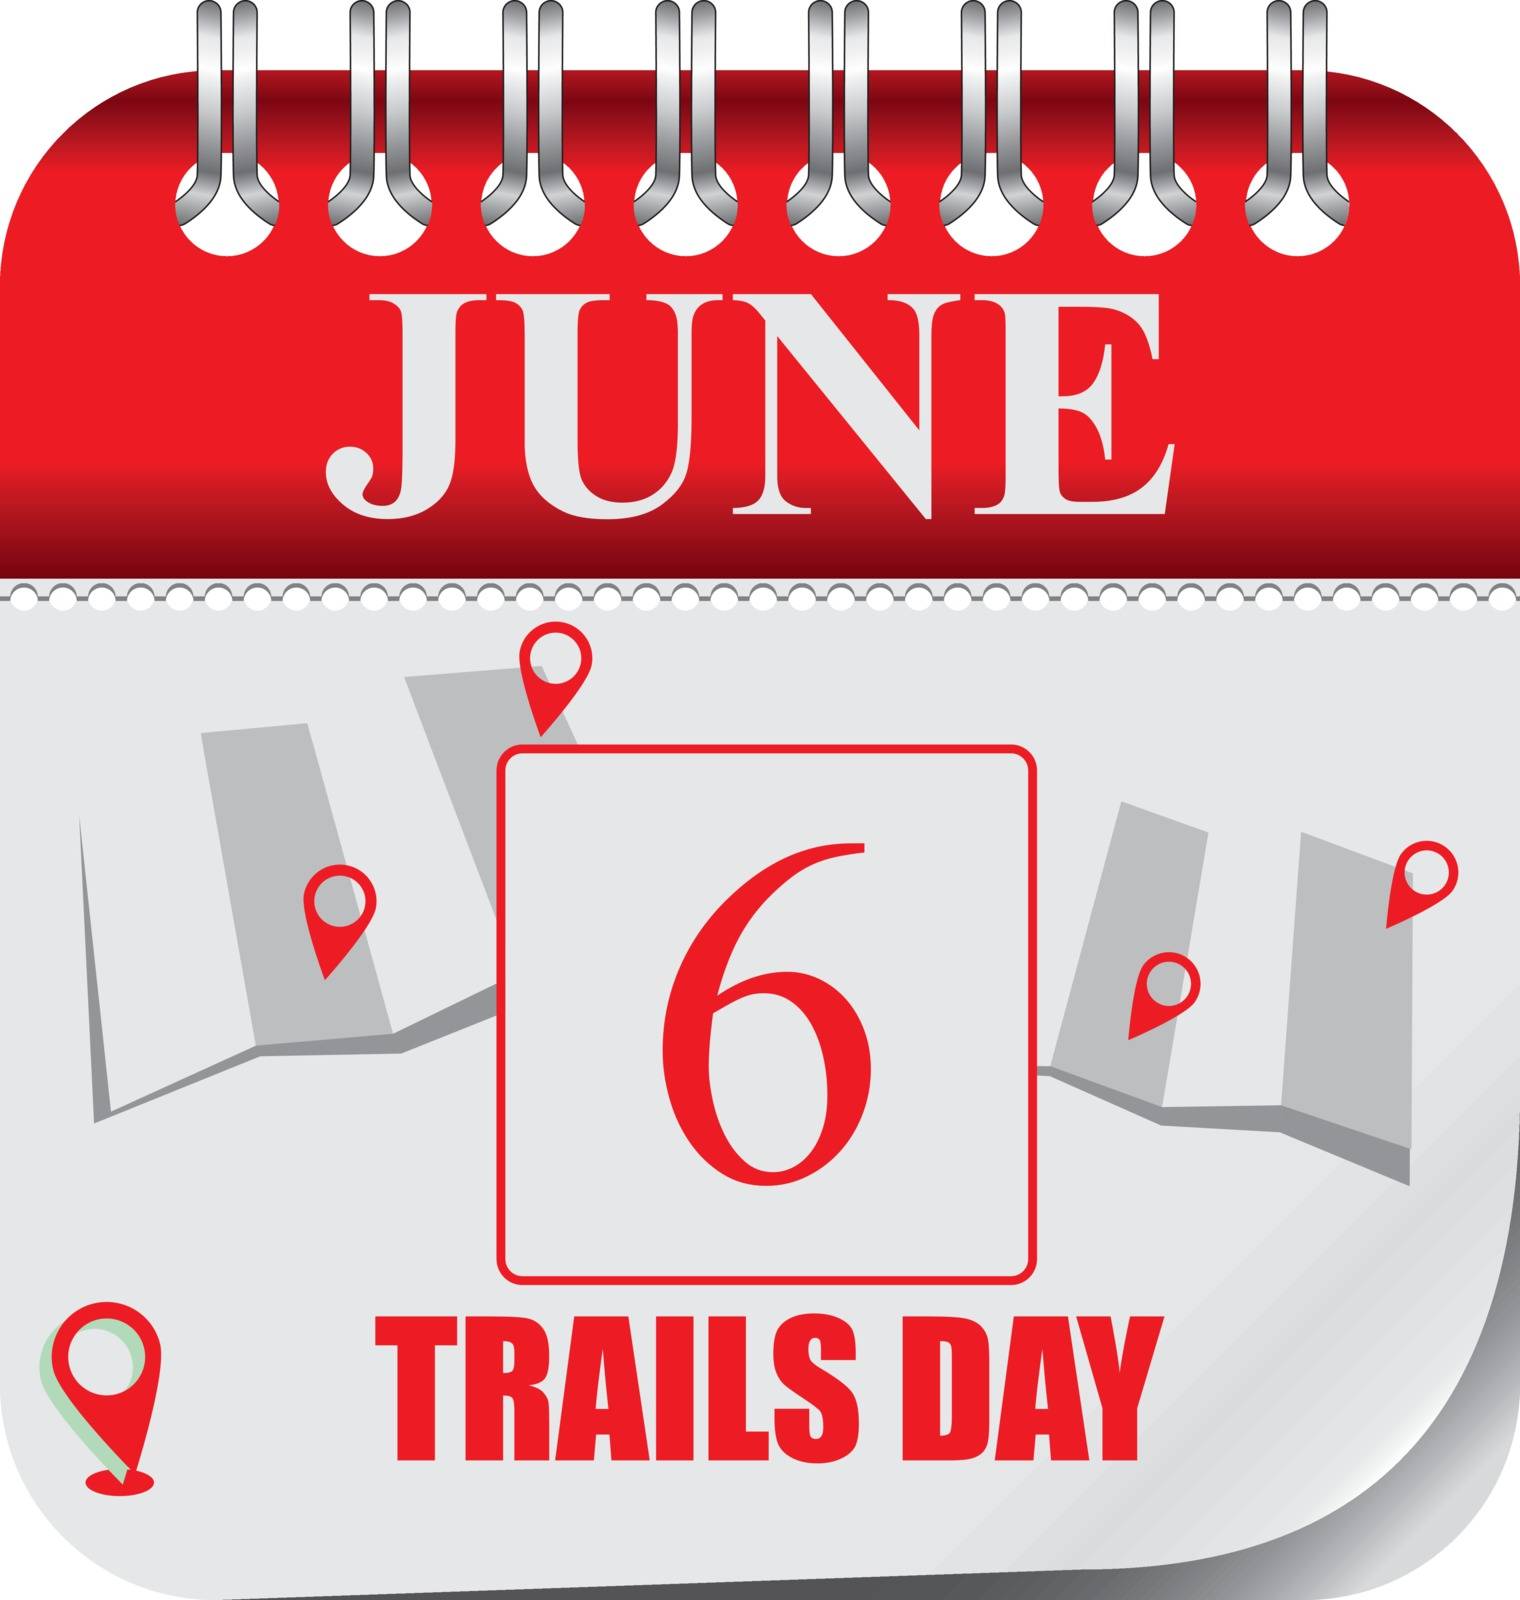 Calendar with perforation for changing dates - june Trails Day